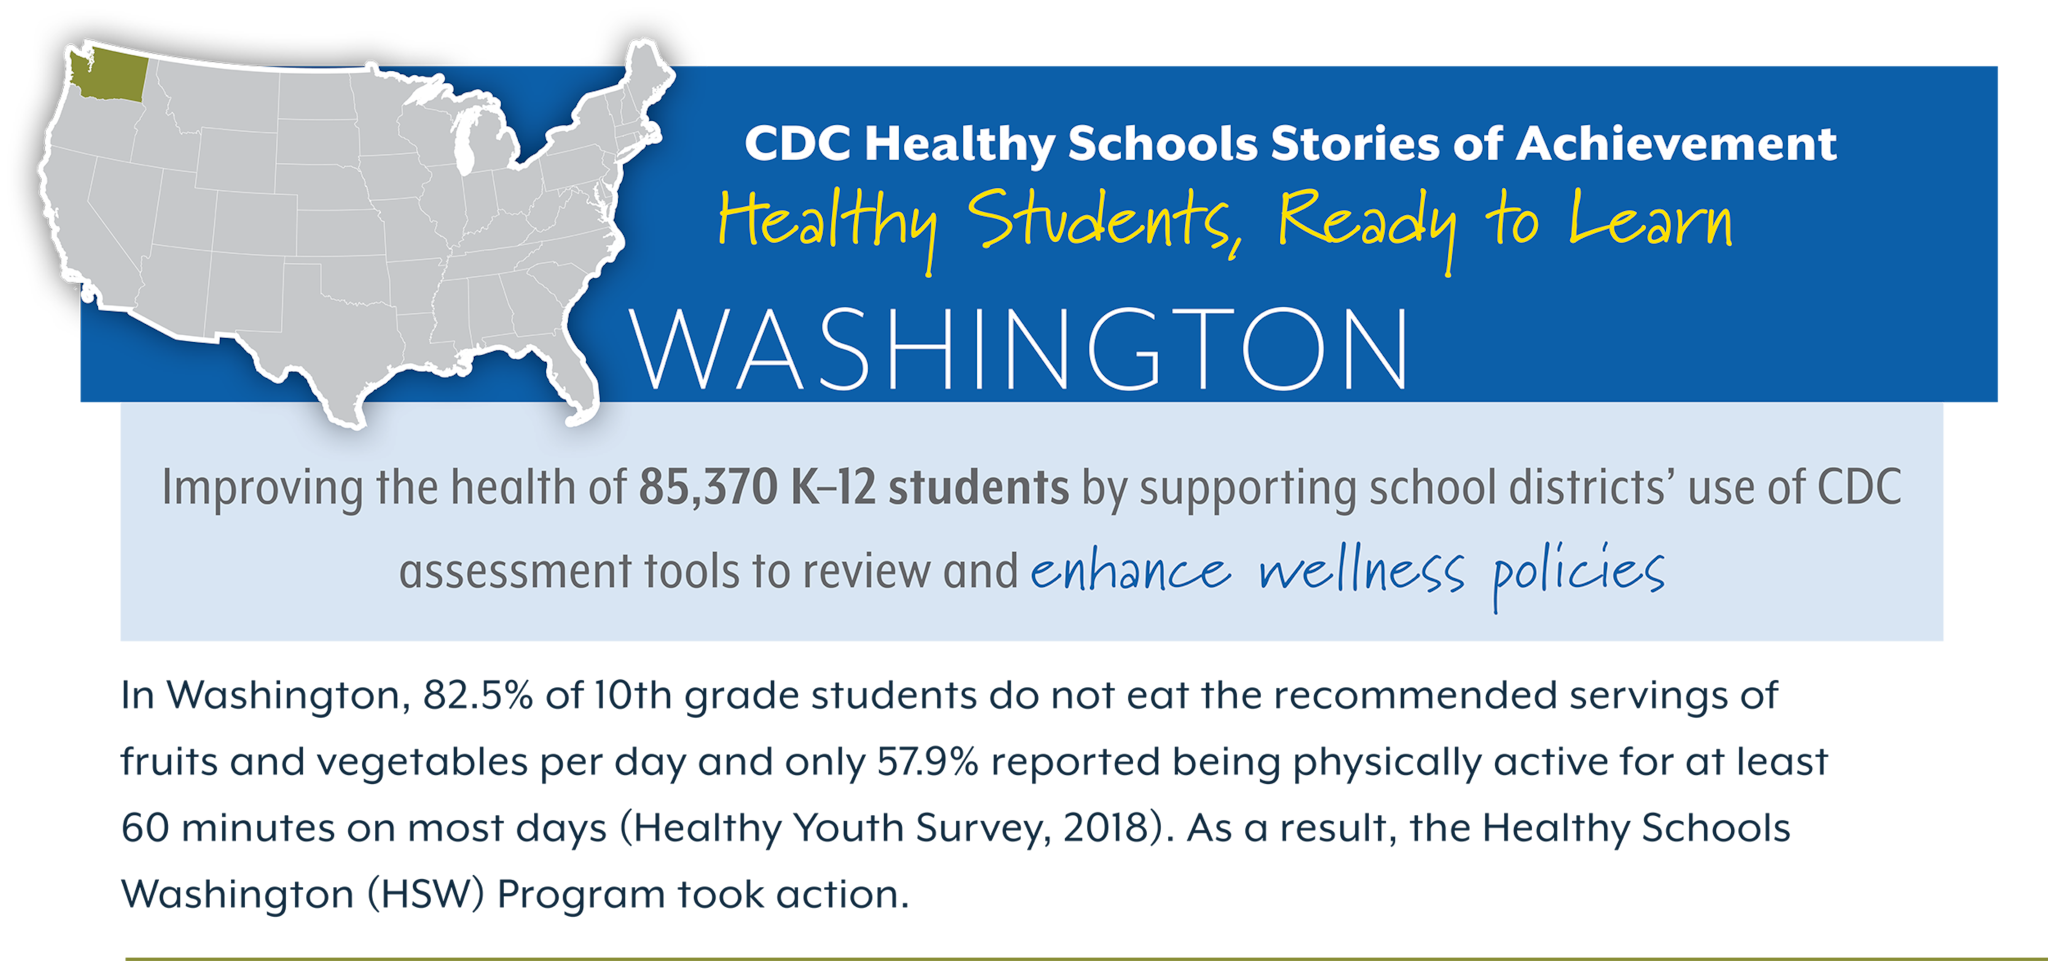 CDC Healthy Schools Stories of Achievement  Healthy Students, Ready to Learn  WASHINGTON Improving the health of 85,370 K–12 students by supporting school districts’ use of CDC  assessment tools to review and enhance wellness policies  In Washington, 82.5% of 10th grade students do not eat the recommended servings of  fruits and vegetables per day and only 57.9% reported being physically active for at least  60 minutes on most days (Healthy Youth Survey, 2018). As a result, the Healthy Schools  Washington (HSW) Program took action.